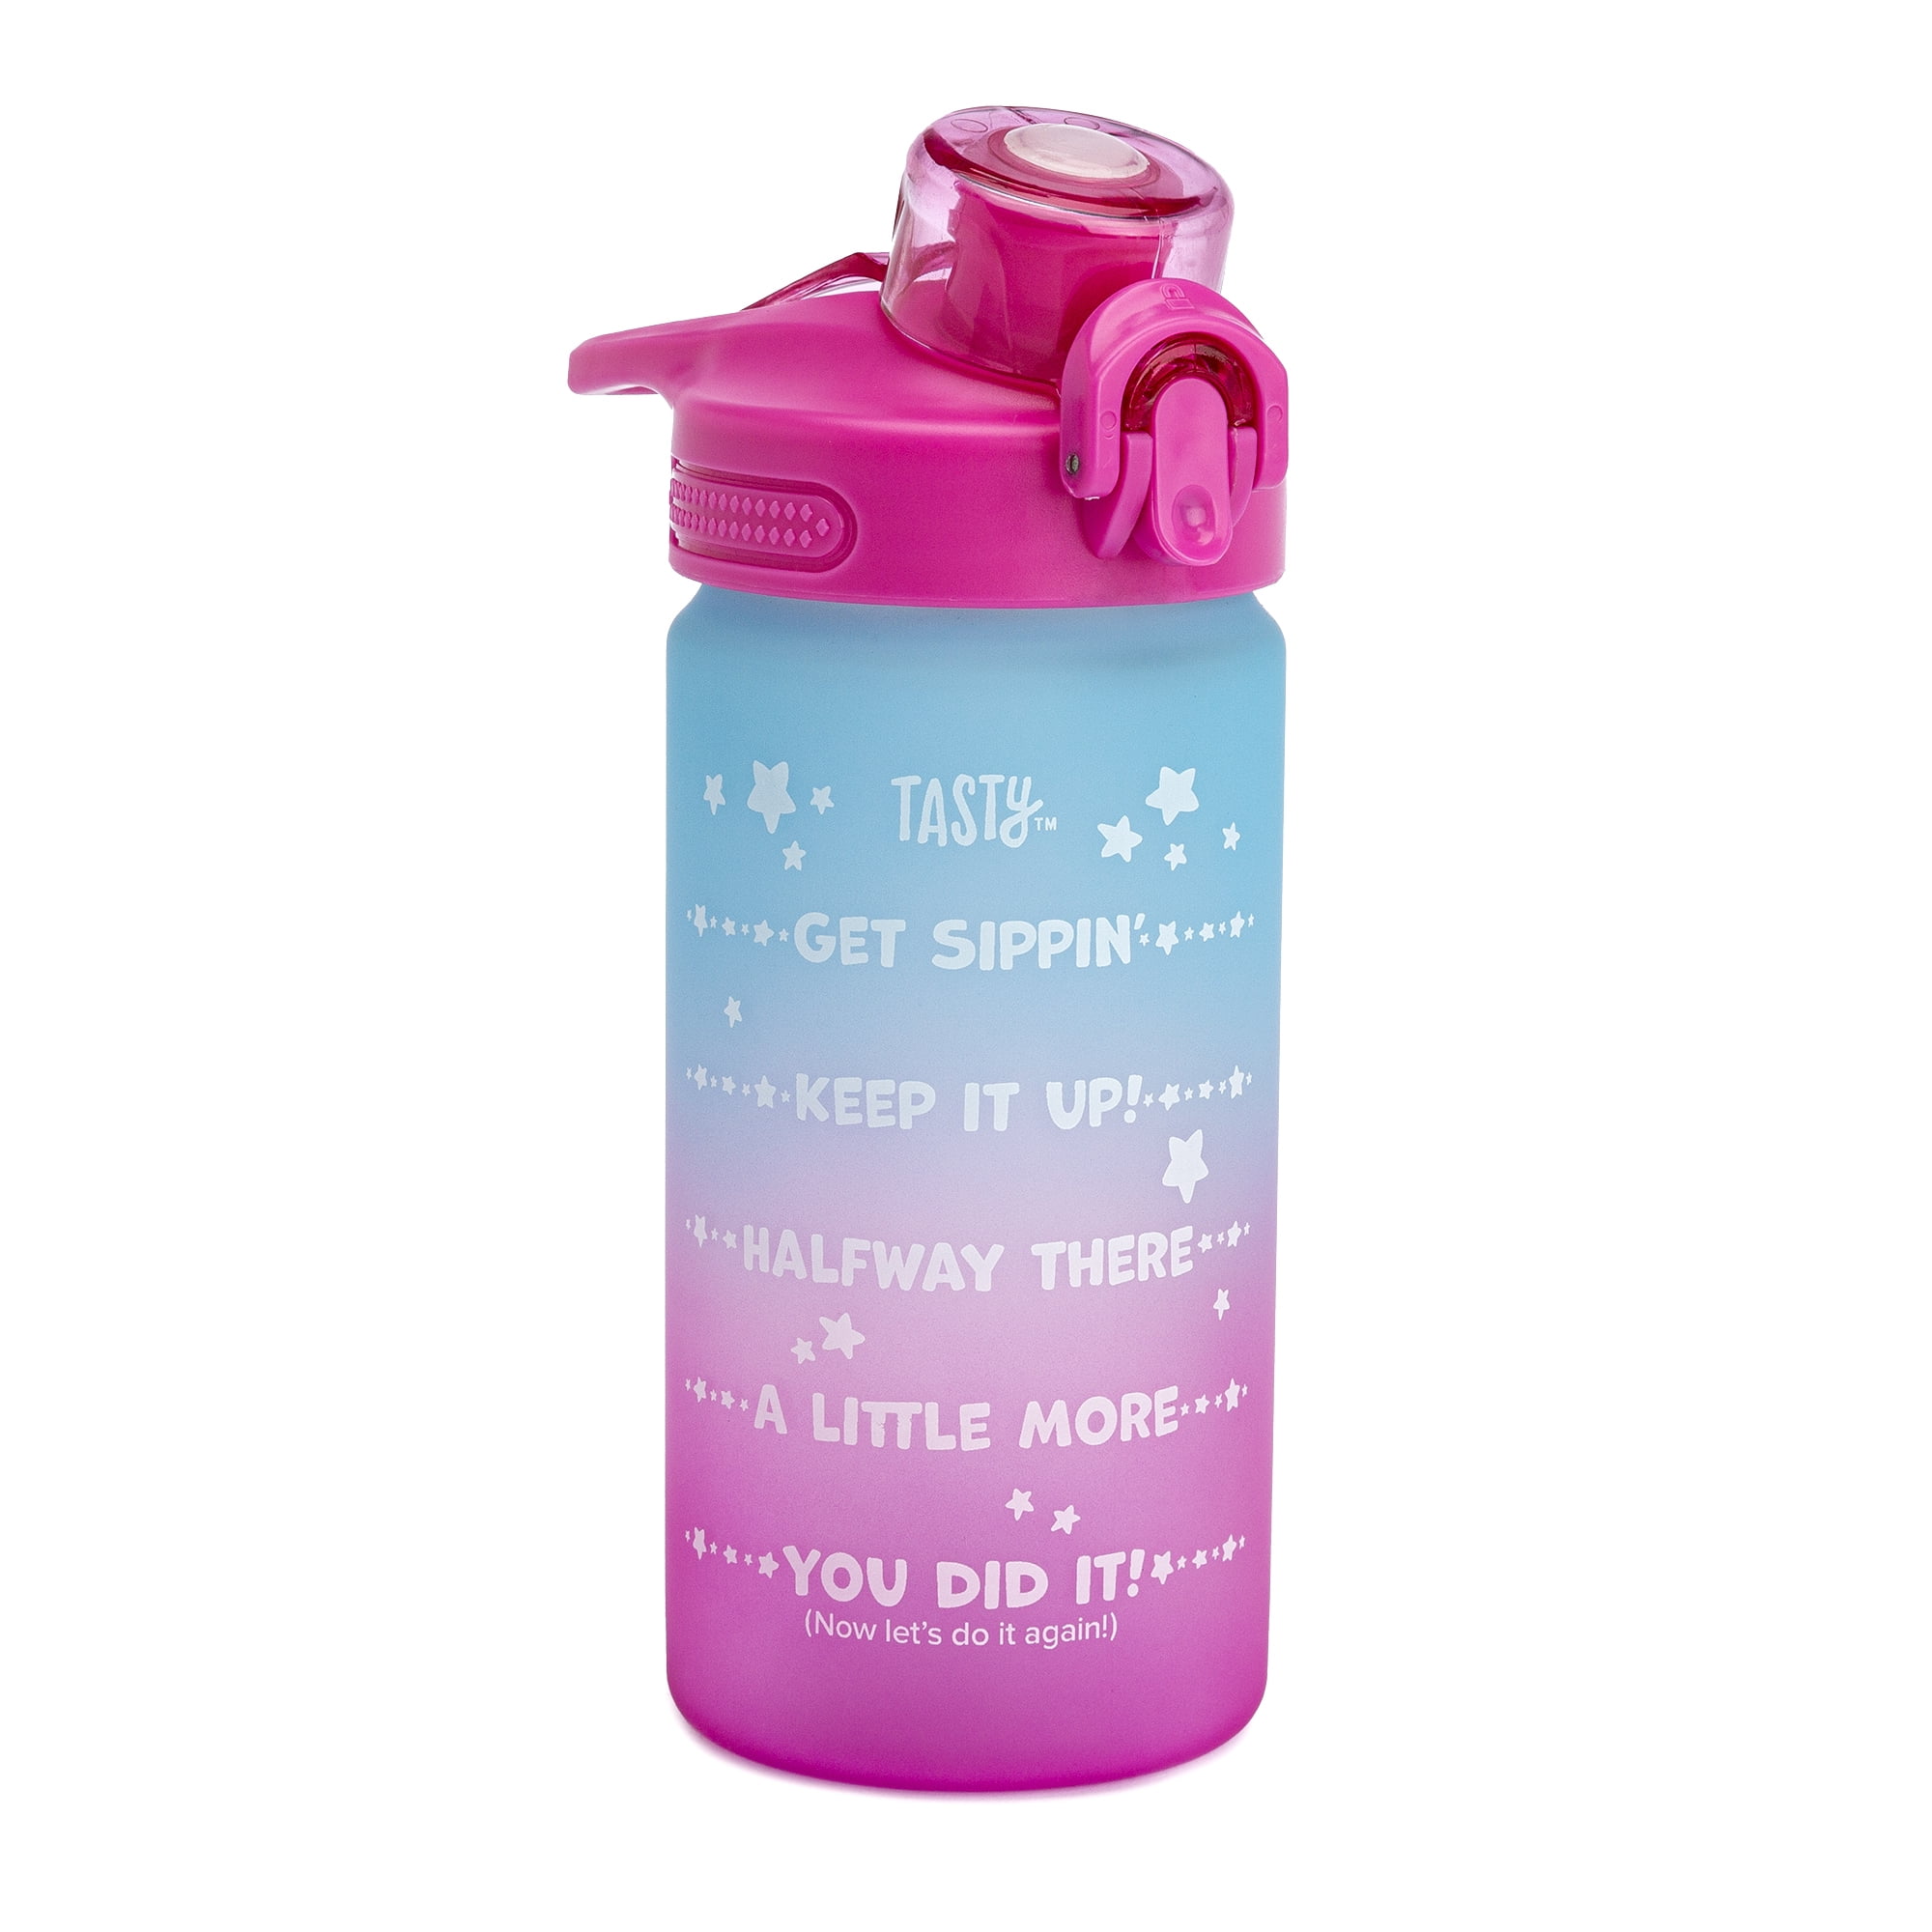 Vibrant Blue, Purple & Pink Gradient Color Water Bottle by Rose Gold